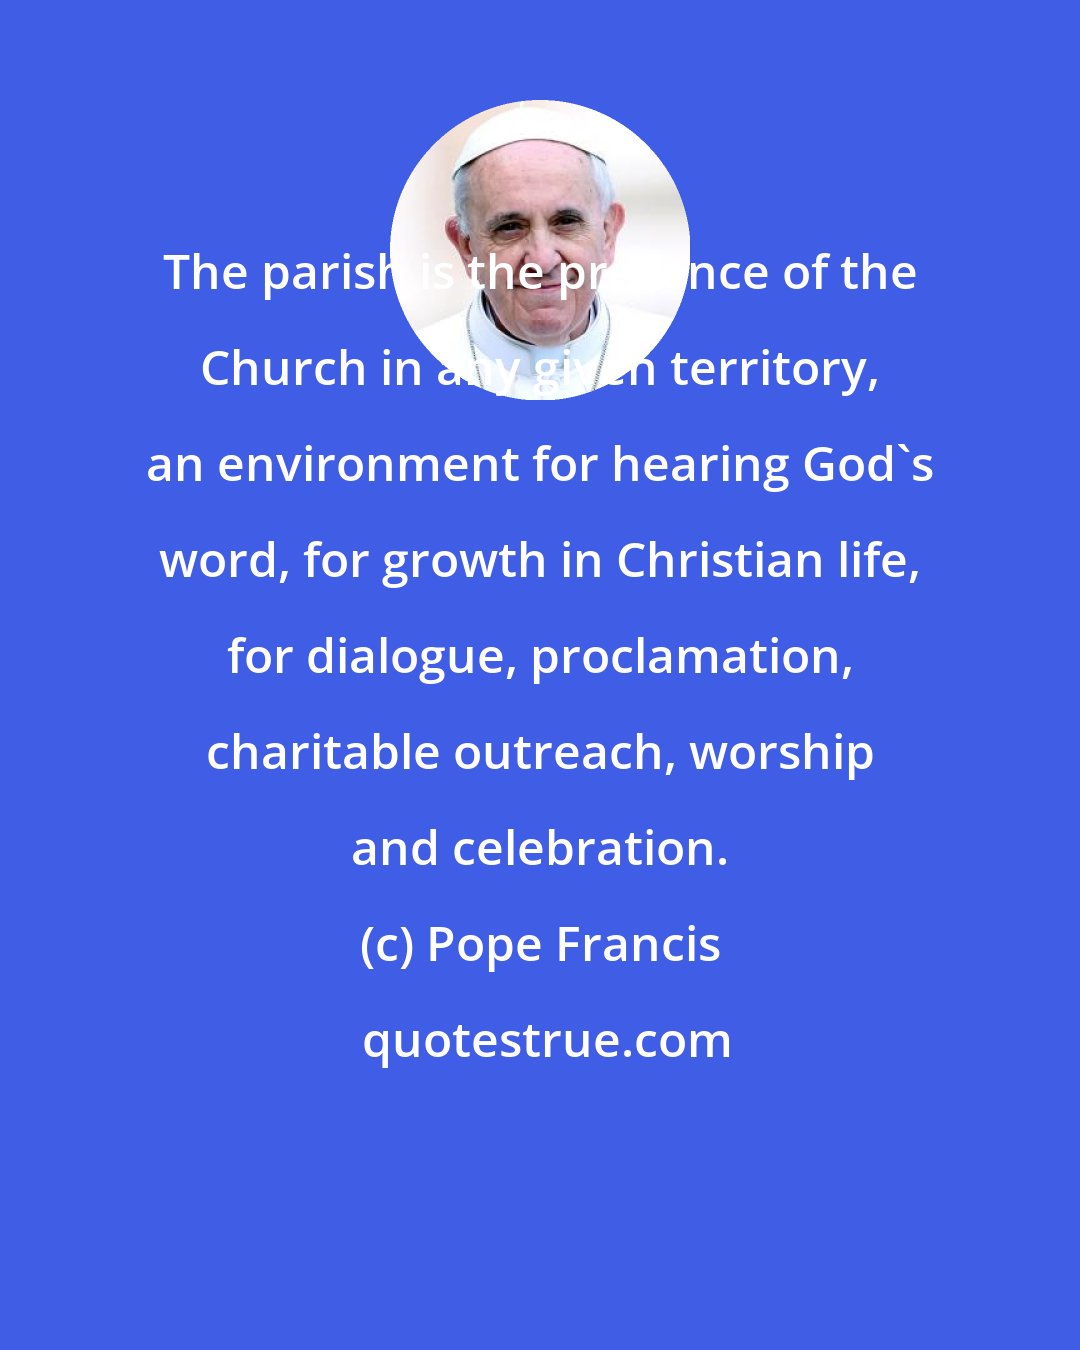 Pope Francis: The parish is the presence of the Church in any given territory, an environment for hearing God's word, for growth in Christian life, for dialogue, proclamation, charitable outreach, worship and celebration.